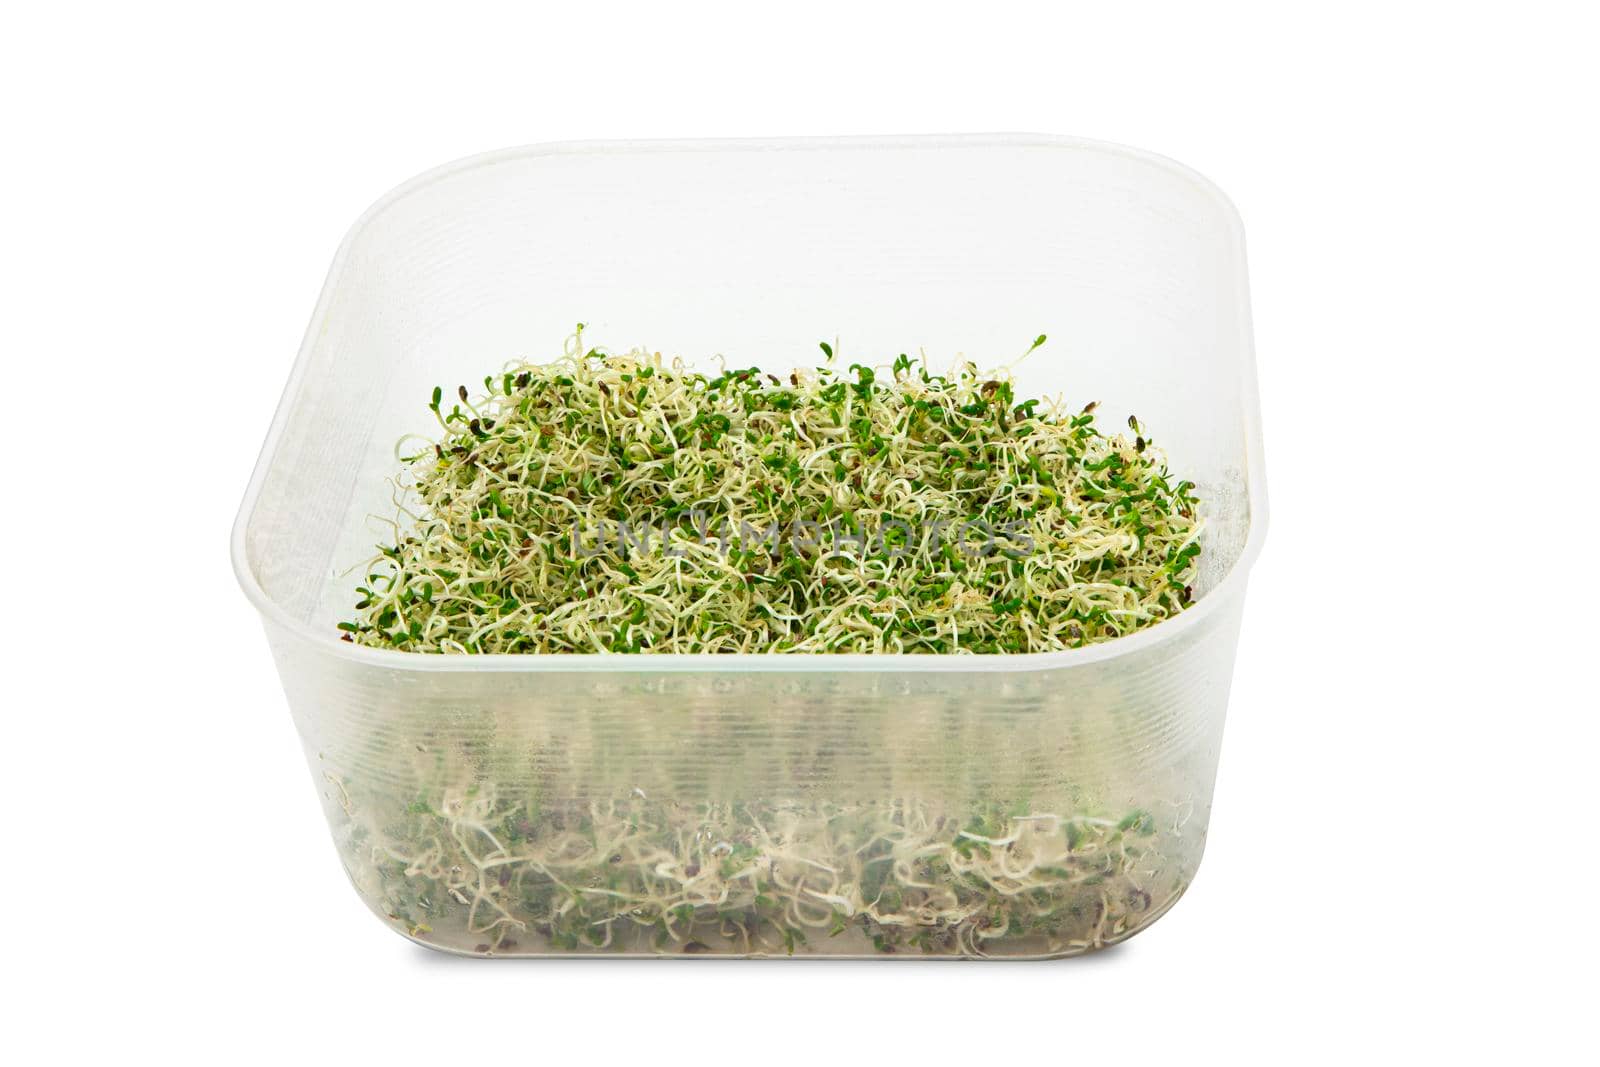 Organic young alfalfa sprouts in a plastic container on white background. by SlayCer